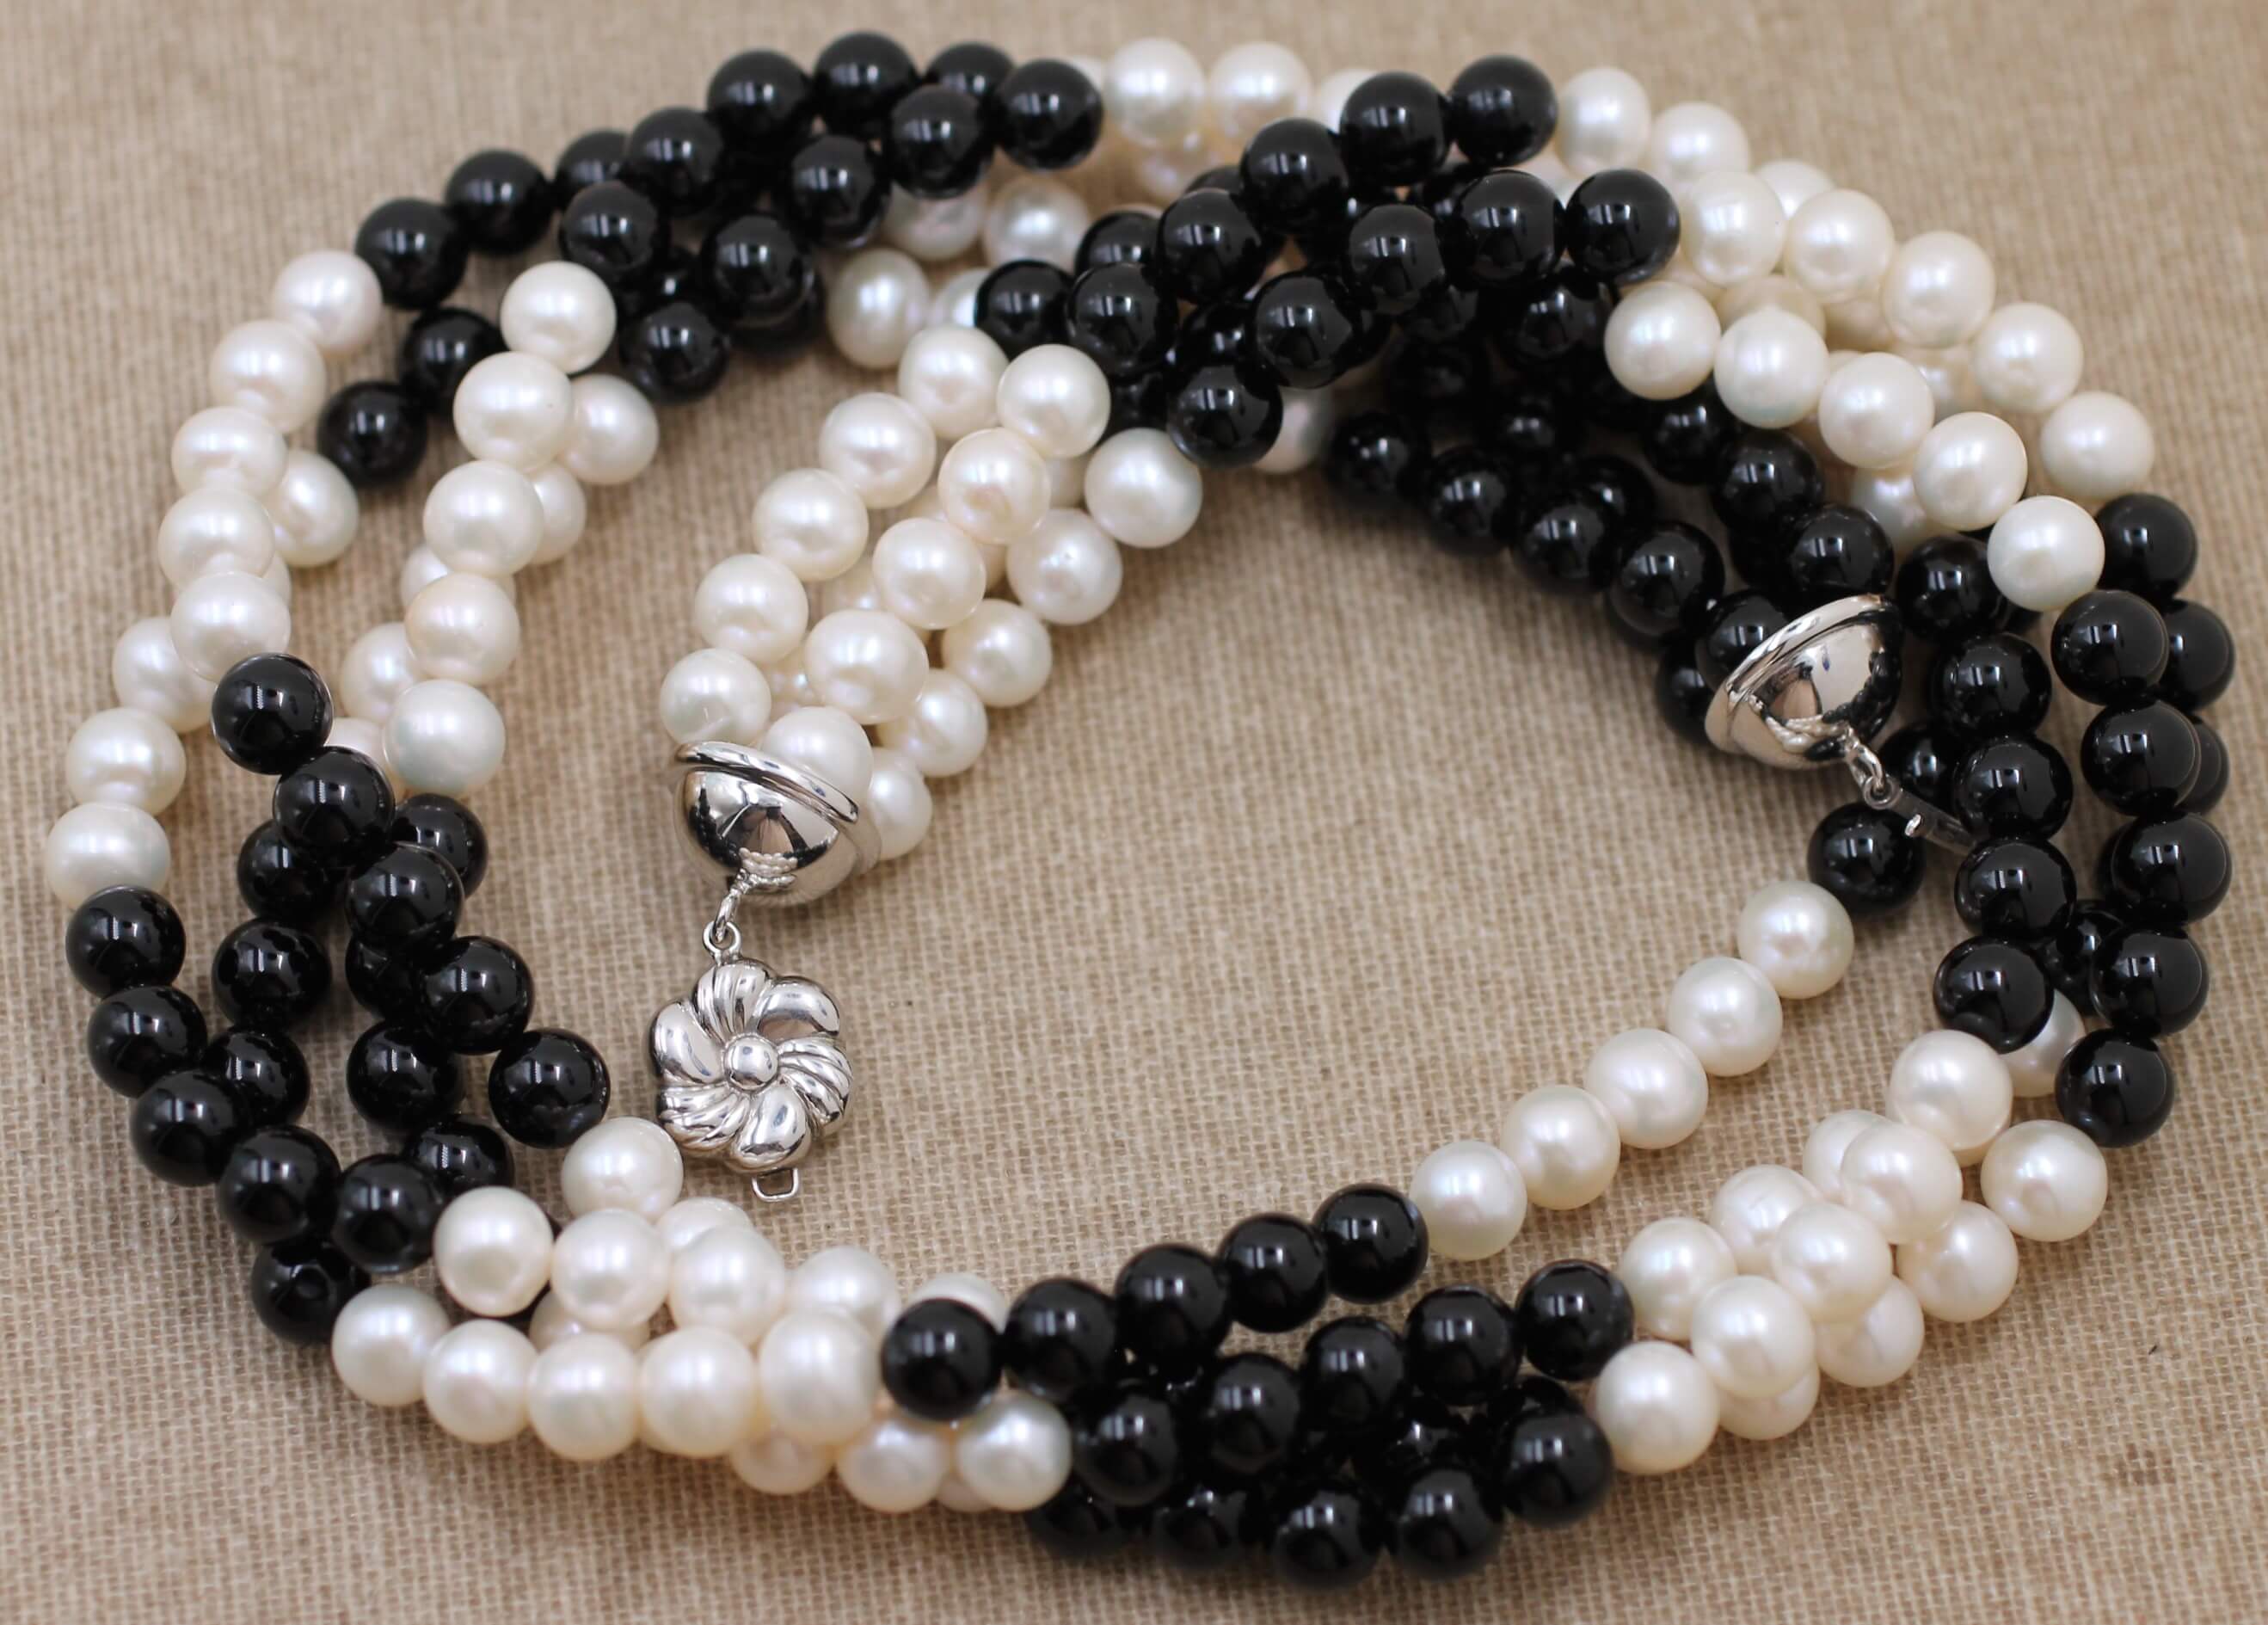 Gold, Onyx, Freshwater Pearls